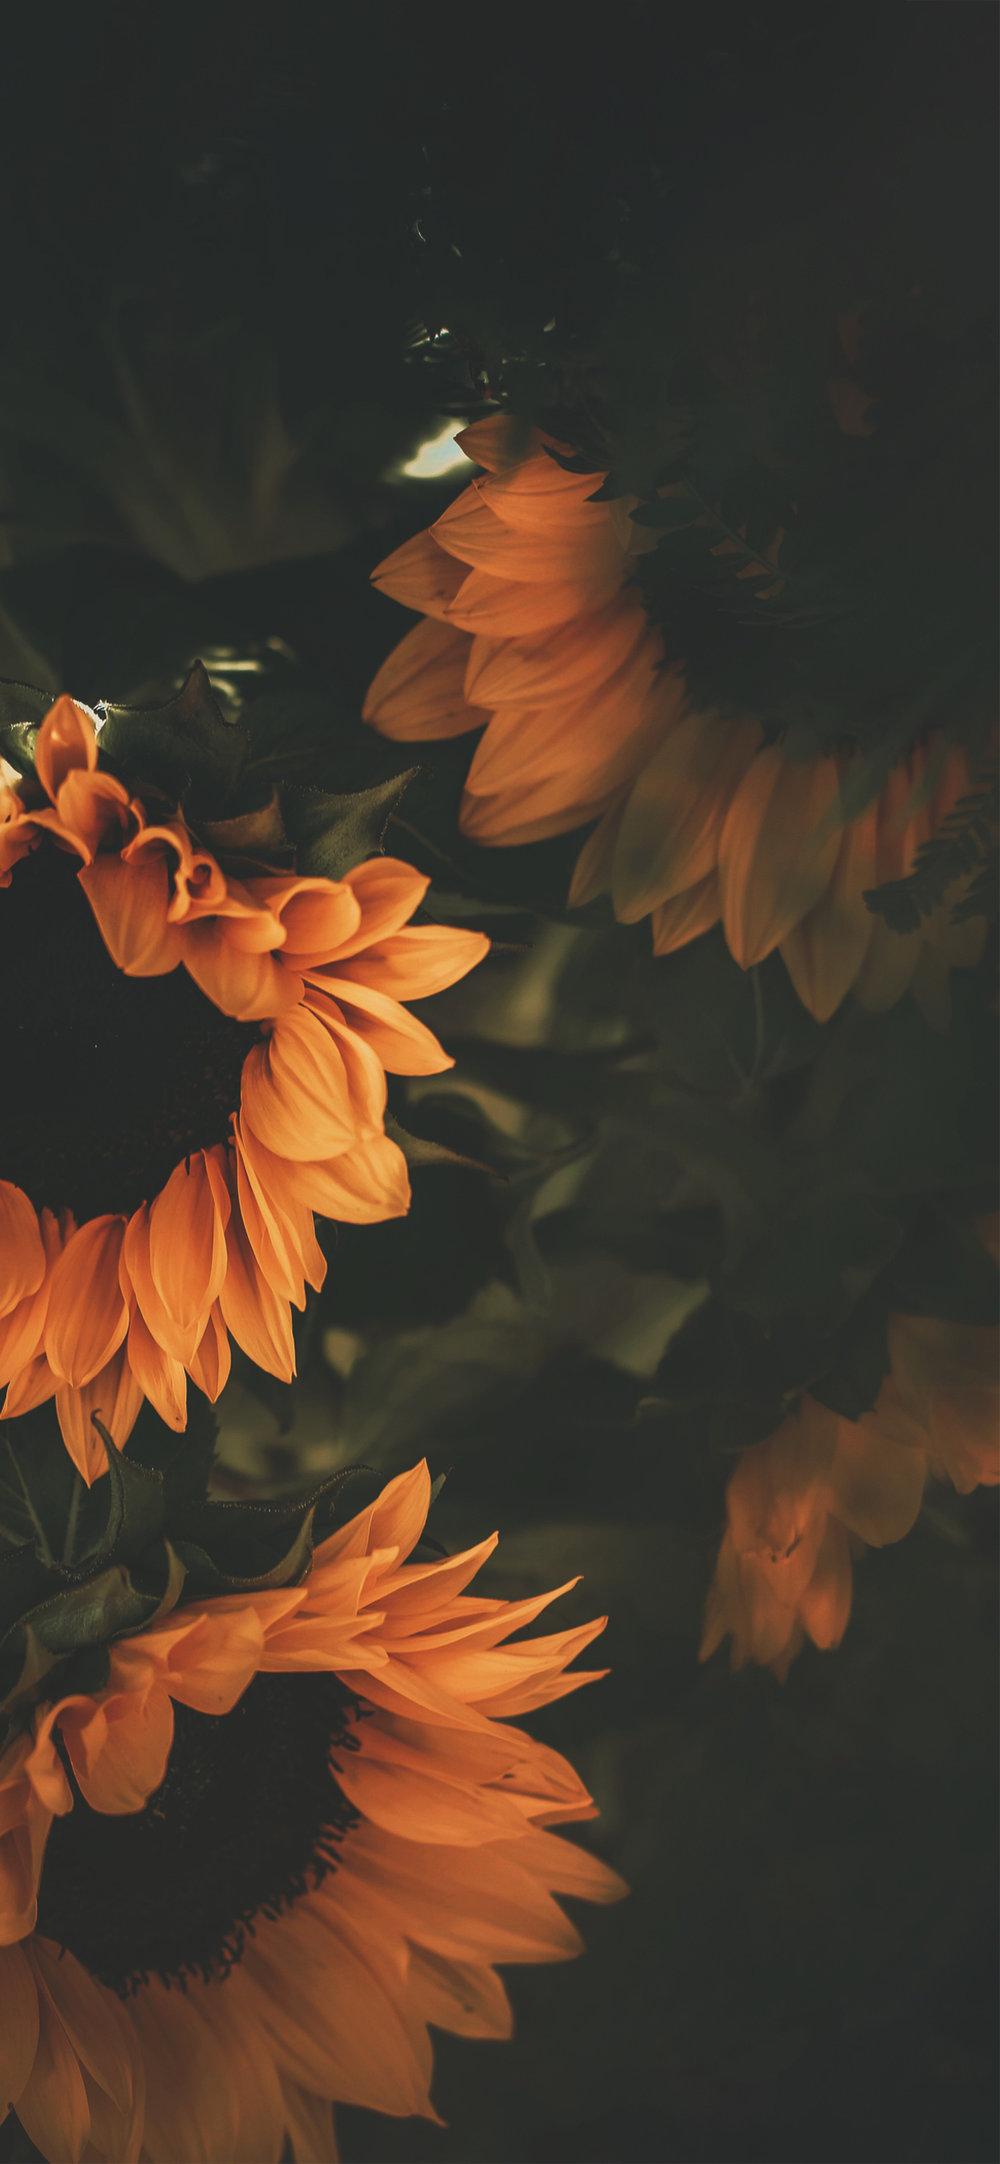 Iphone wallpaper with sunflower + Wallpapers Download 2023